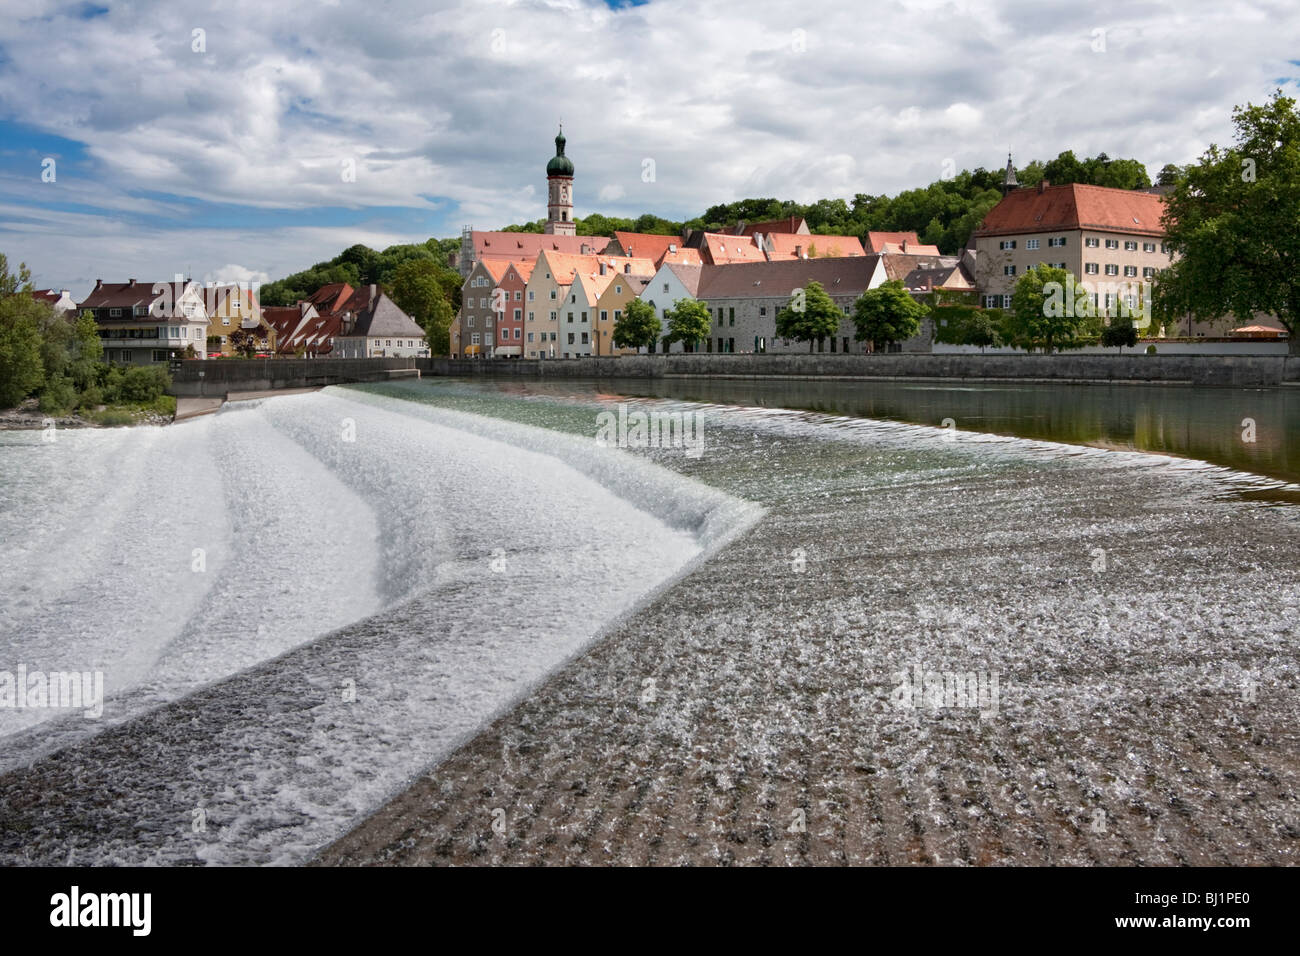 River with townscape, Lech [Landsberg am Lech] Bavaria, Germany Stock Photo